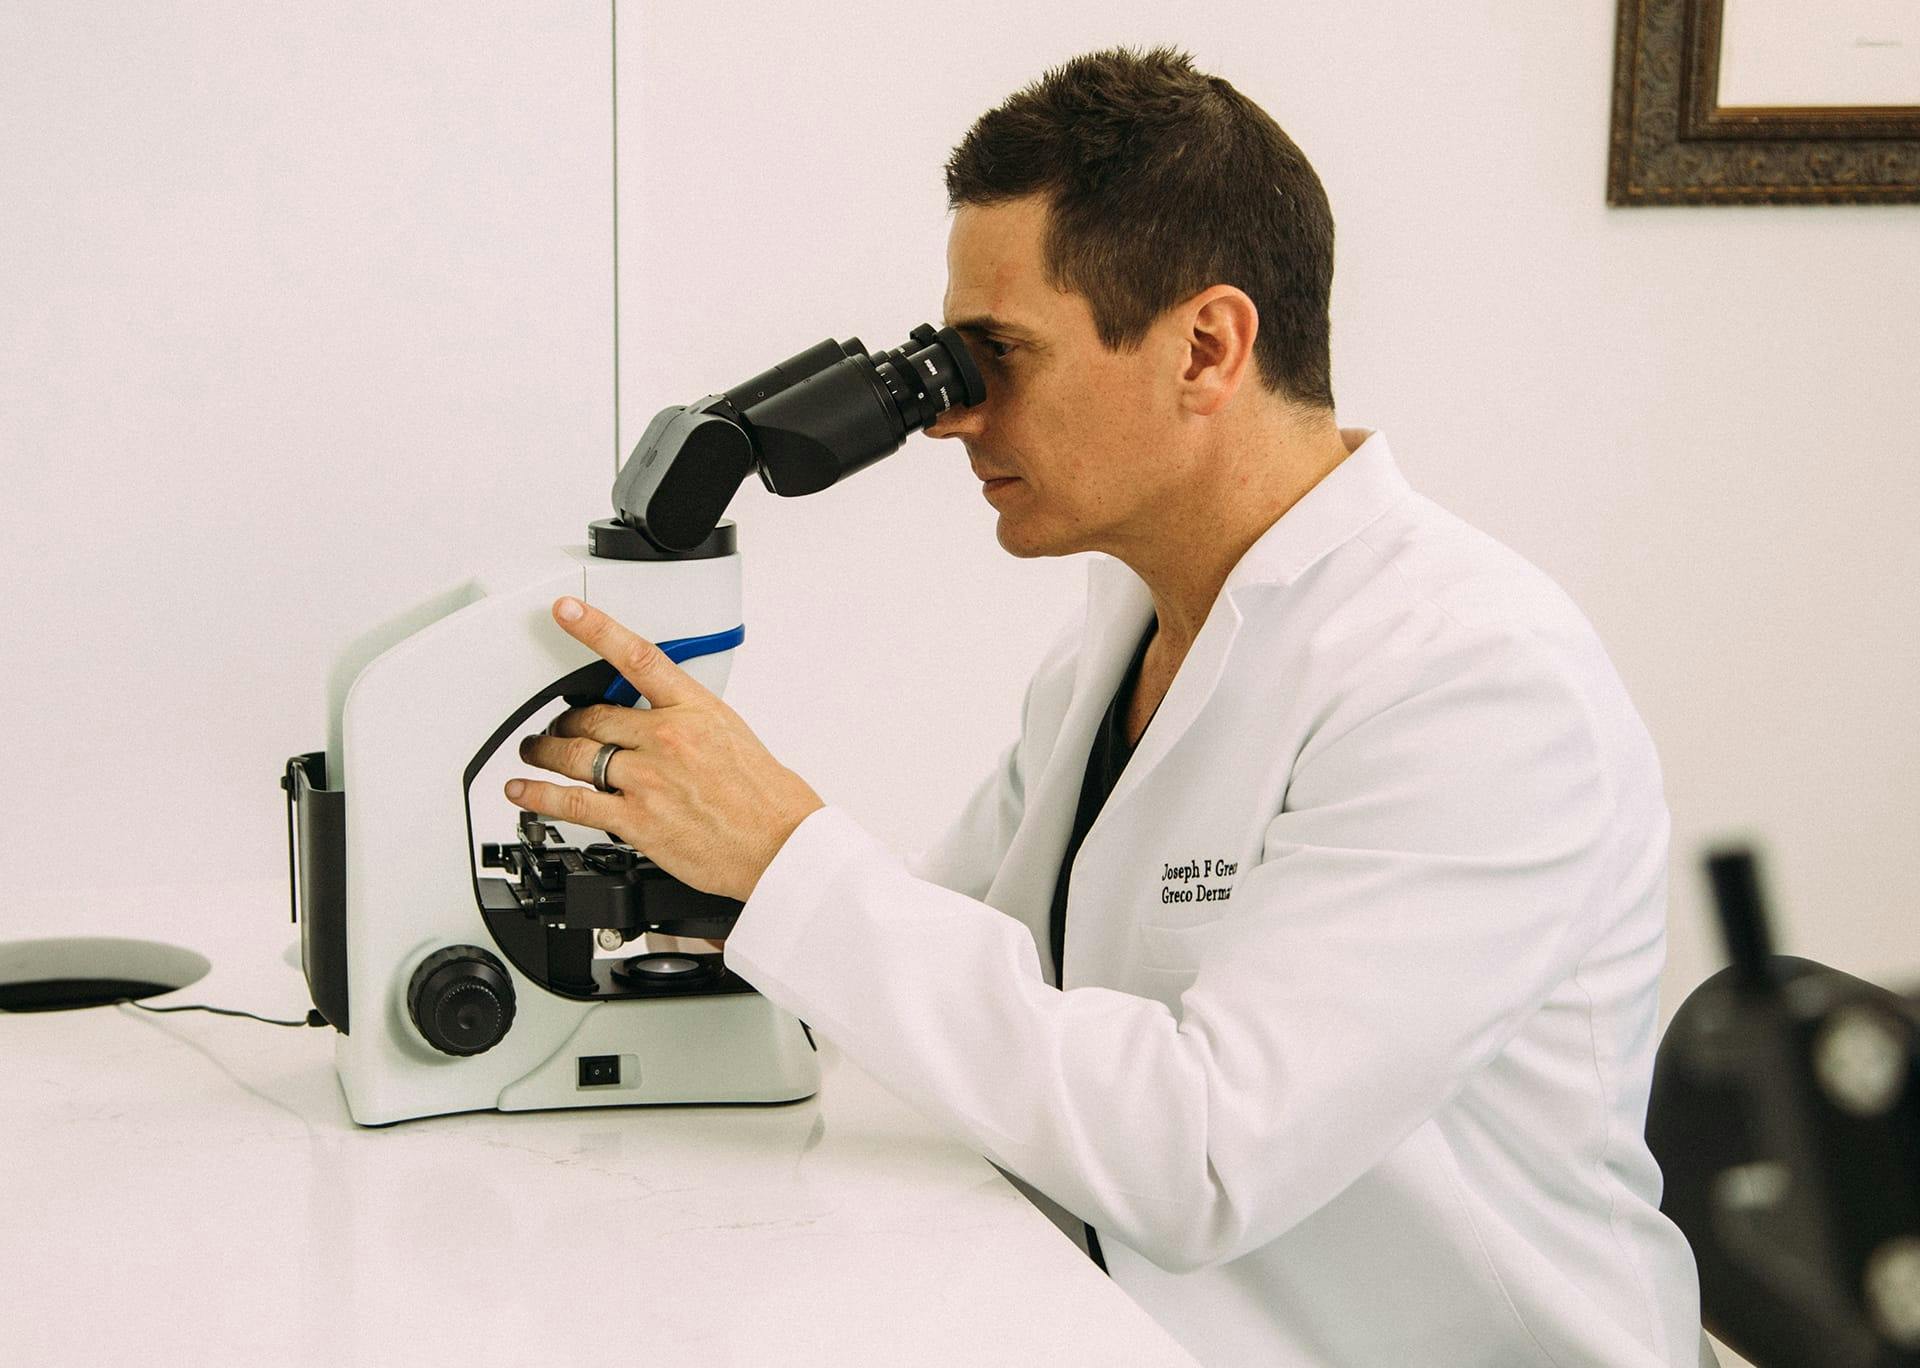 Dr. Greco looking through a microscope